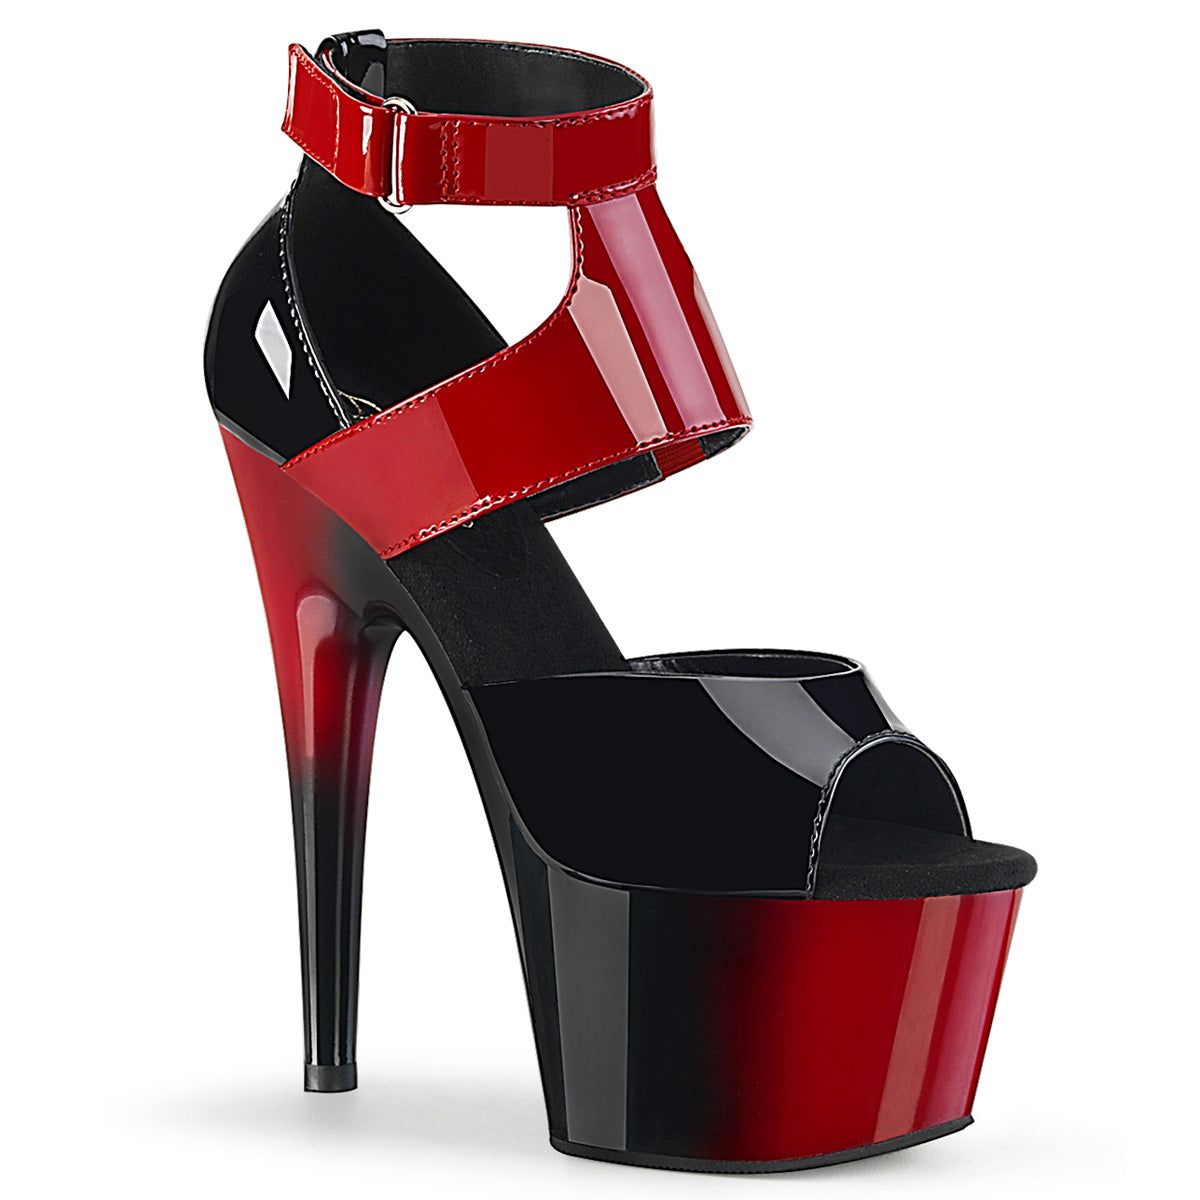 ADORE-700-16 Pleaser Fetish Black-Red Ombre Exotic Dancing High Heel Shoes